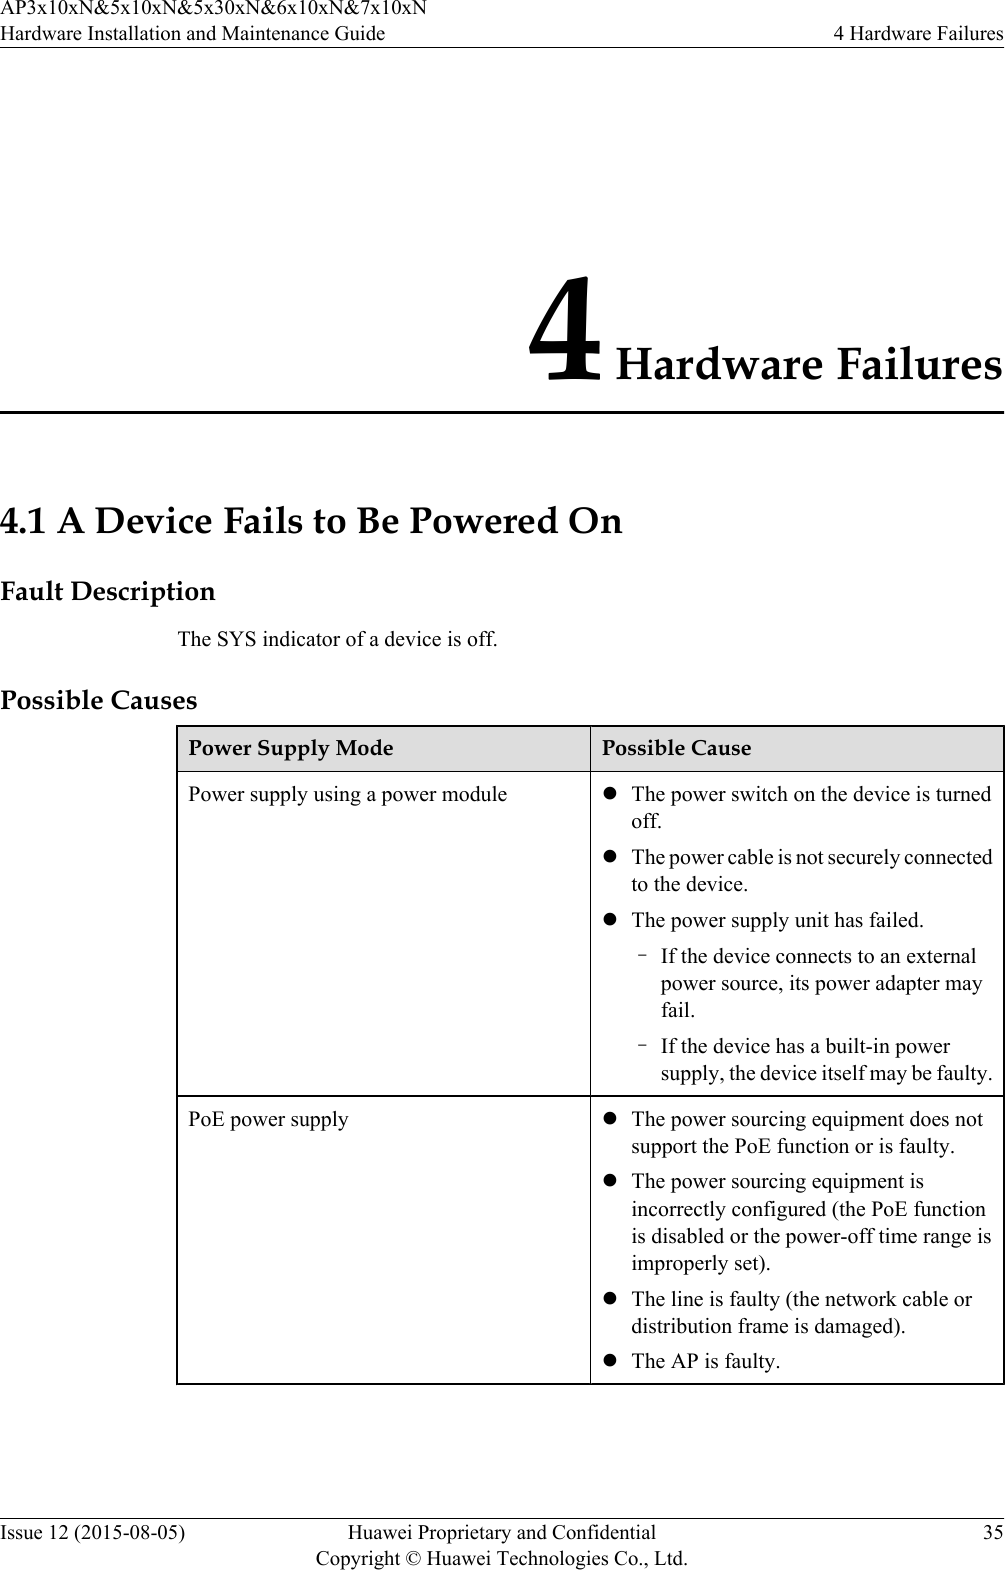 4 Hardware Failures4.1 A Device Fails to Be Powered OnFault DescriptionThe SYS indicator of a device is off.Possible CausesPower Supply Mode Possible CausePower supply using a power module lThe power switch on the device is turnedoff.lThe power cable is not securely connectedto the device.lThe power supply unit has failed.–If the device connects to an externalpower source, its power adapter mayfail.–If the device has a built-in powersupply, the device itself may be faulty.PoE power supply lThe power sourcing equipment does notsupport the PoE function or is faulty.lThe power sourcing equipment isincorrectly configured (the PoE functionis disabled or the power-off time range isimproperly set).lThe line is faulty (the network cable ordistribution frame is damaged).lThe AP is faulty. AP3x10xN&amp;5x10xN&amp;5x30xN&amp;6x10xN&amp;7x10xNHardware Installation and Maintenance Guide 4 Hardware FailuresIssue 12 (2015-08-05) Huawei Proprietary and ConfidentialCopyright © Huawei Technologies Co., Ltd.35